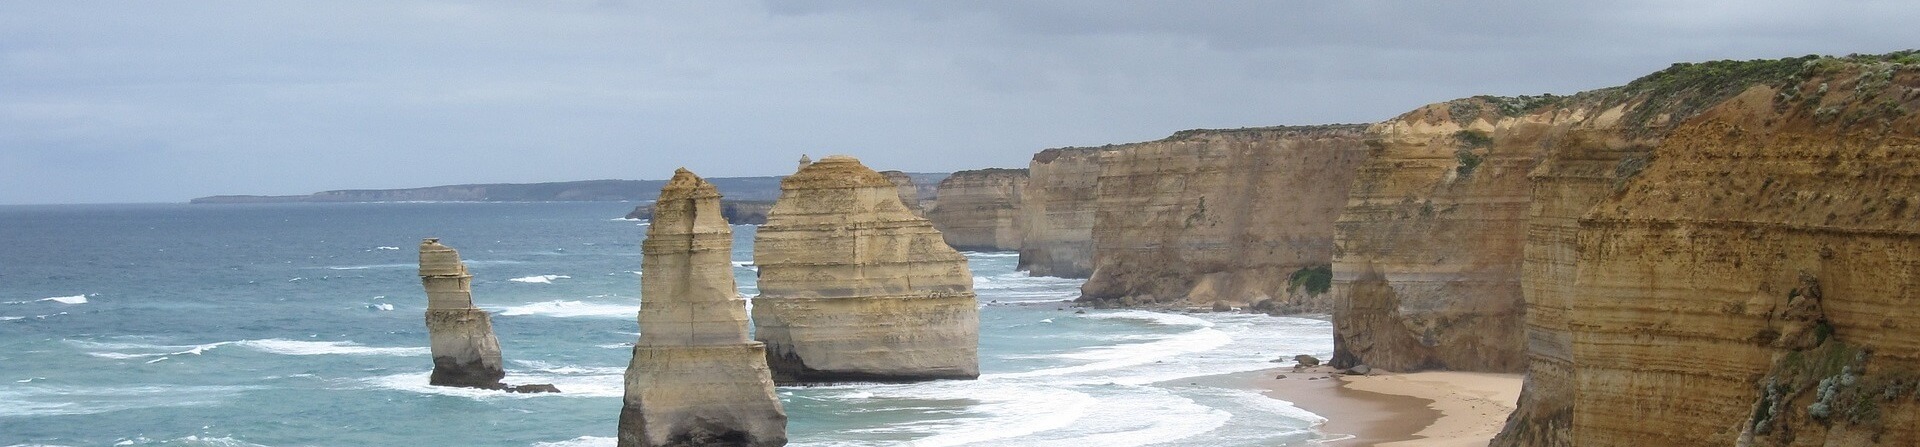 What is the weather like on the Great Ocean Road?